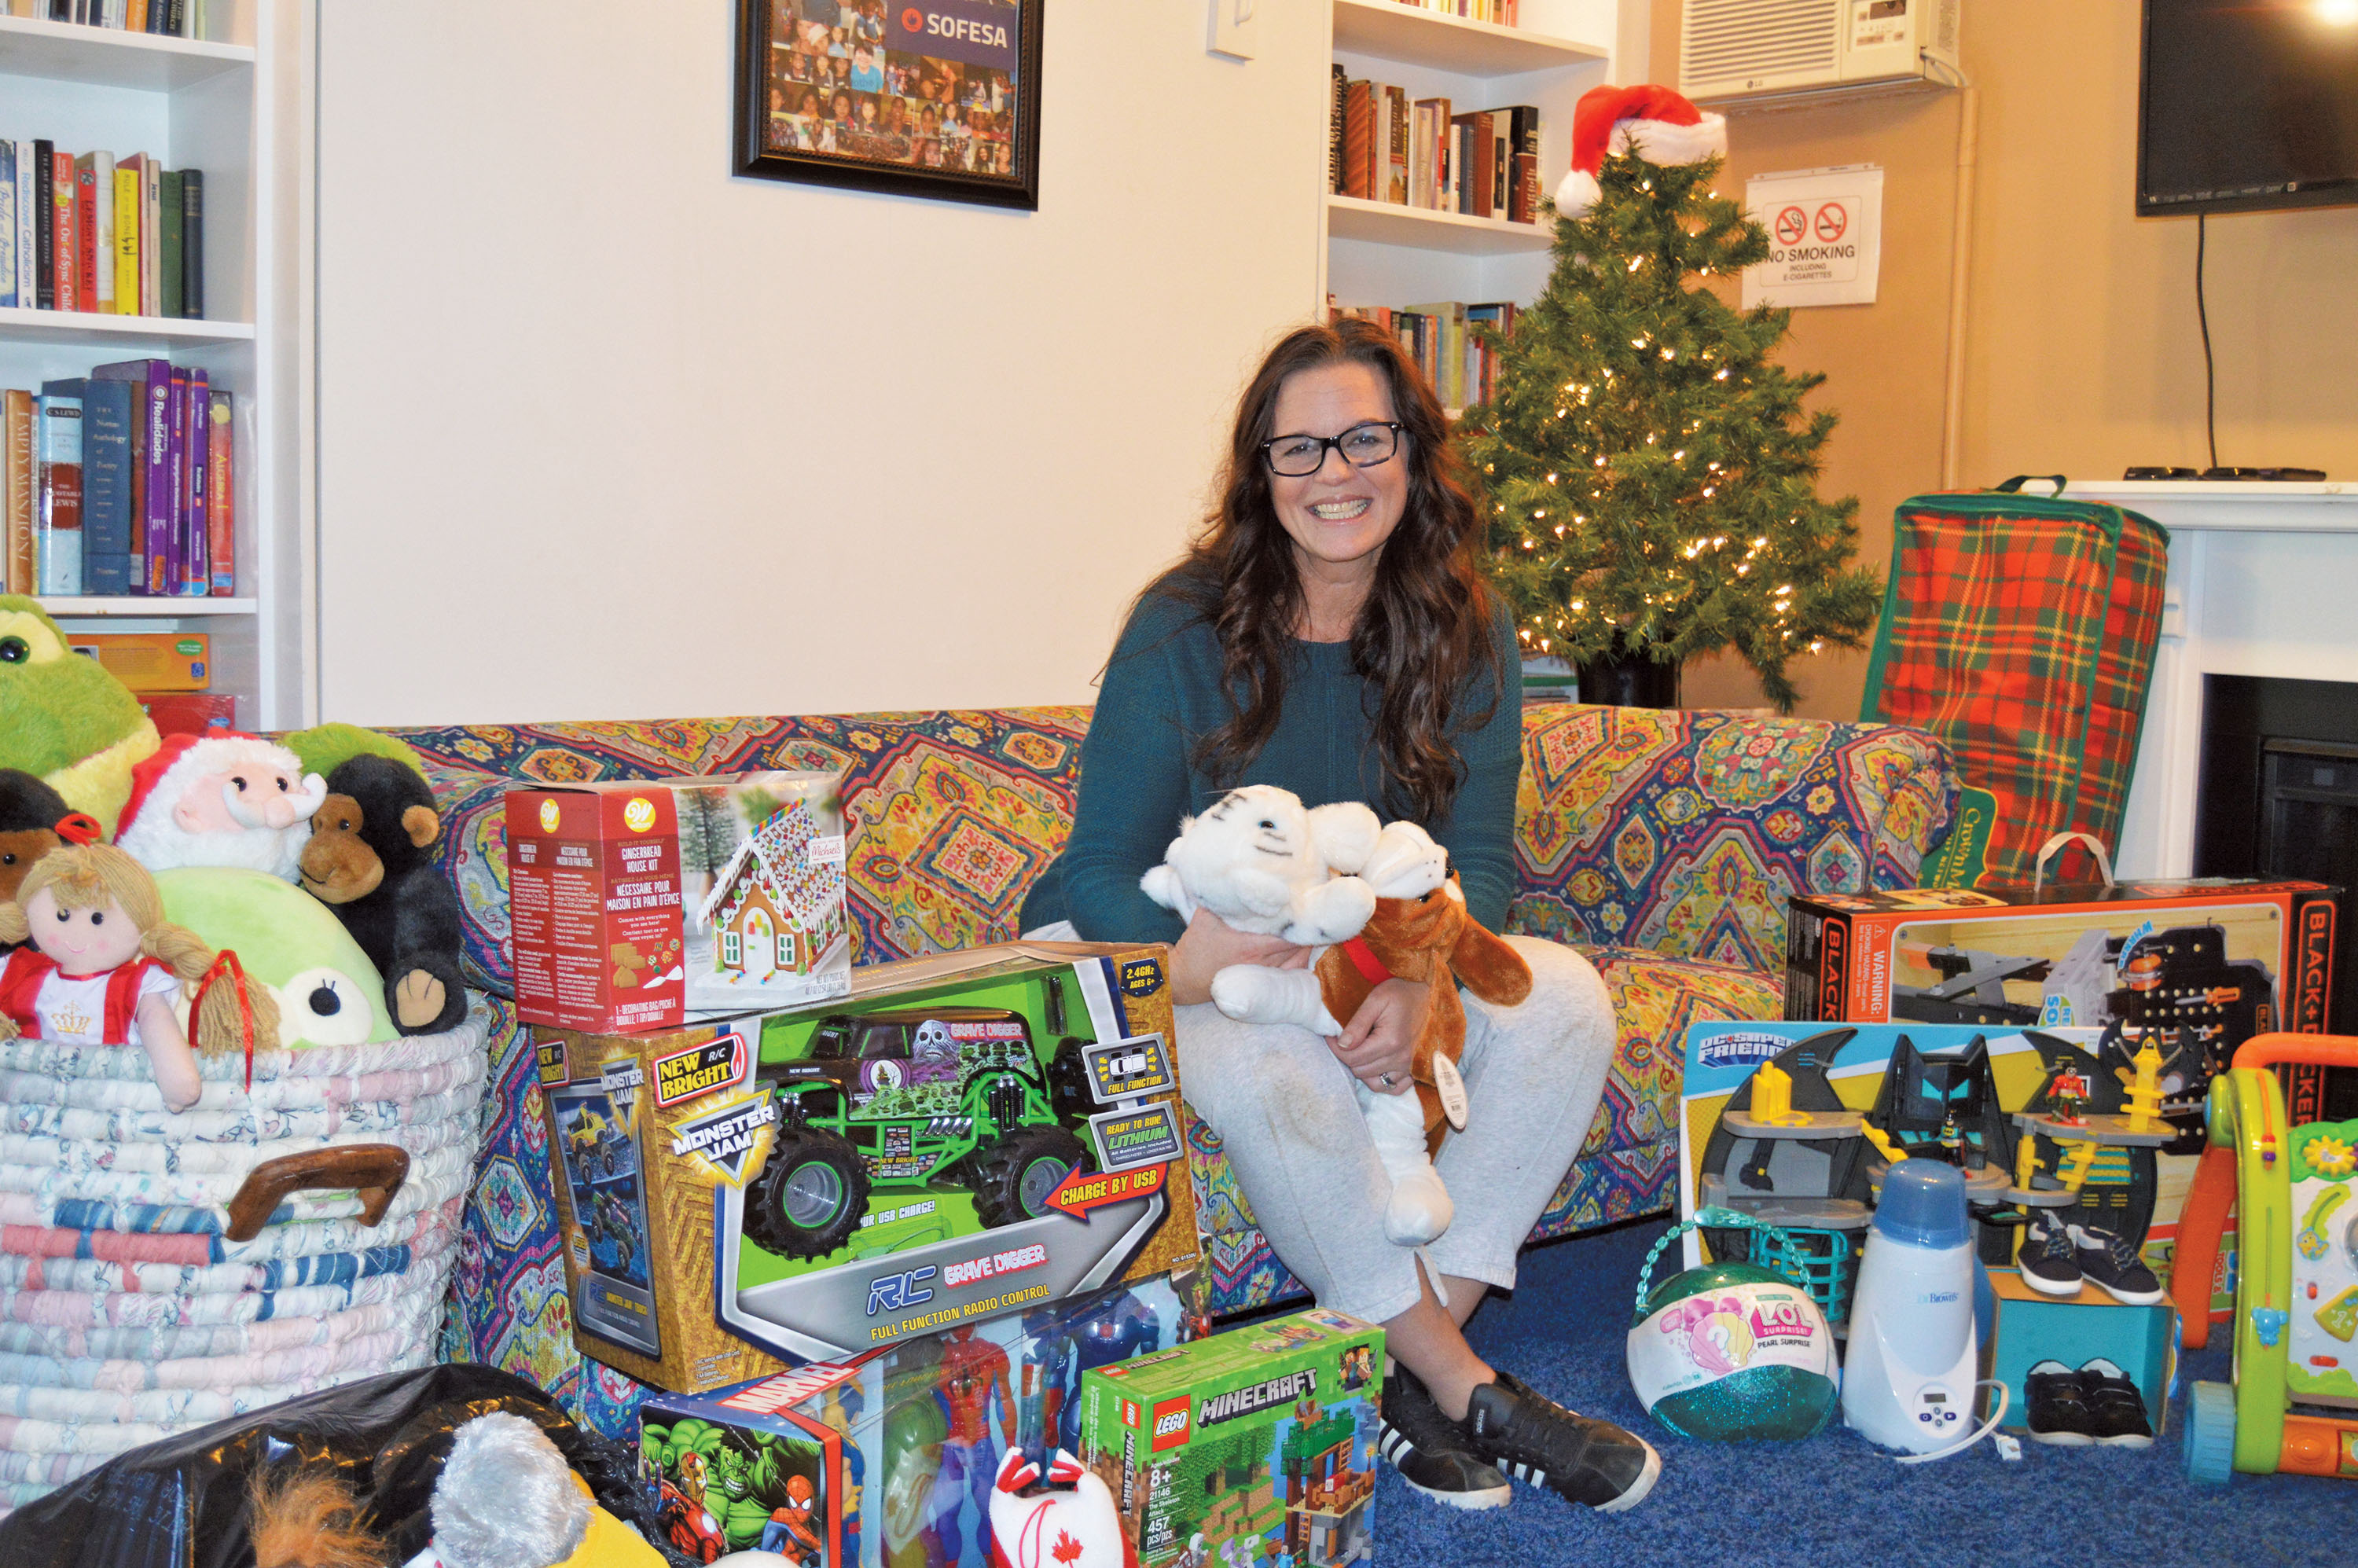 Westchester’s SOFESA works to help homeless families and children in need